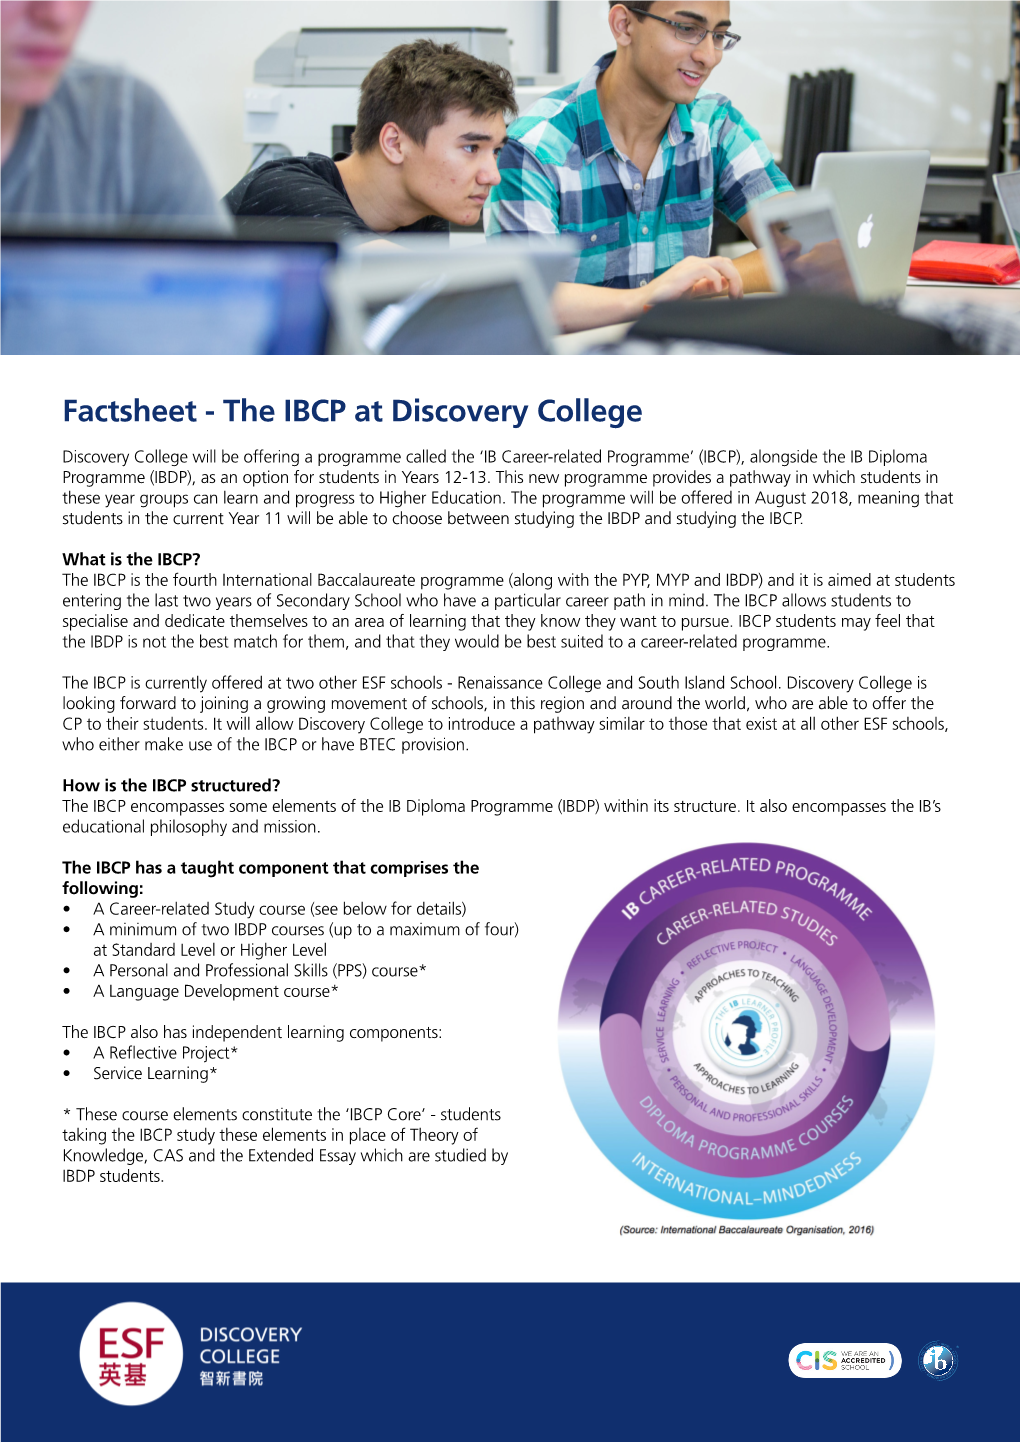 Factsheet - the IBCP at Discovery College